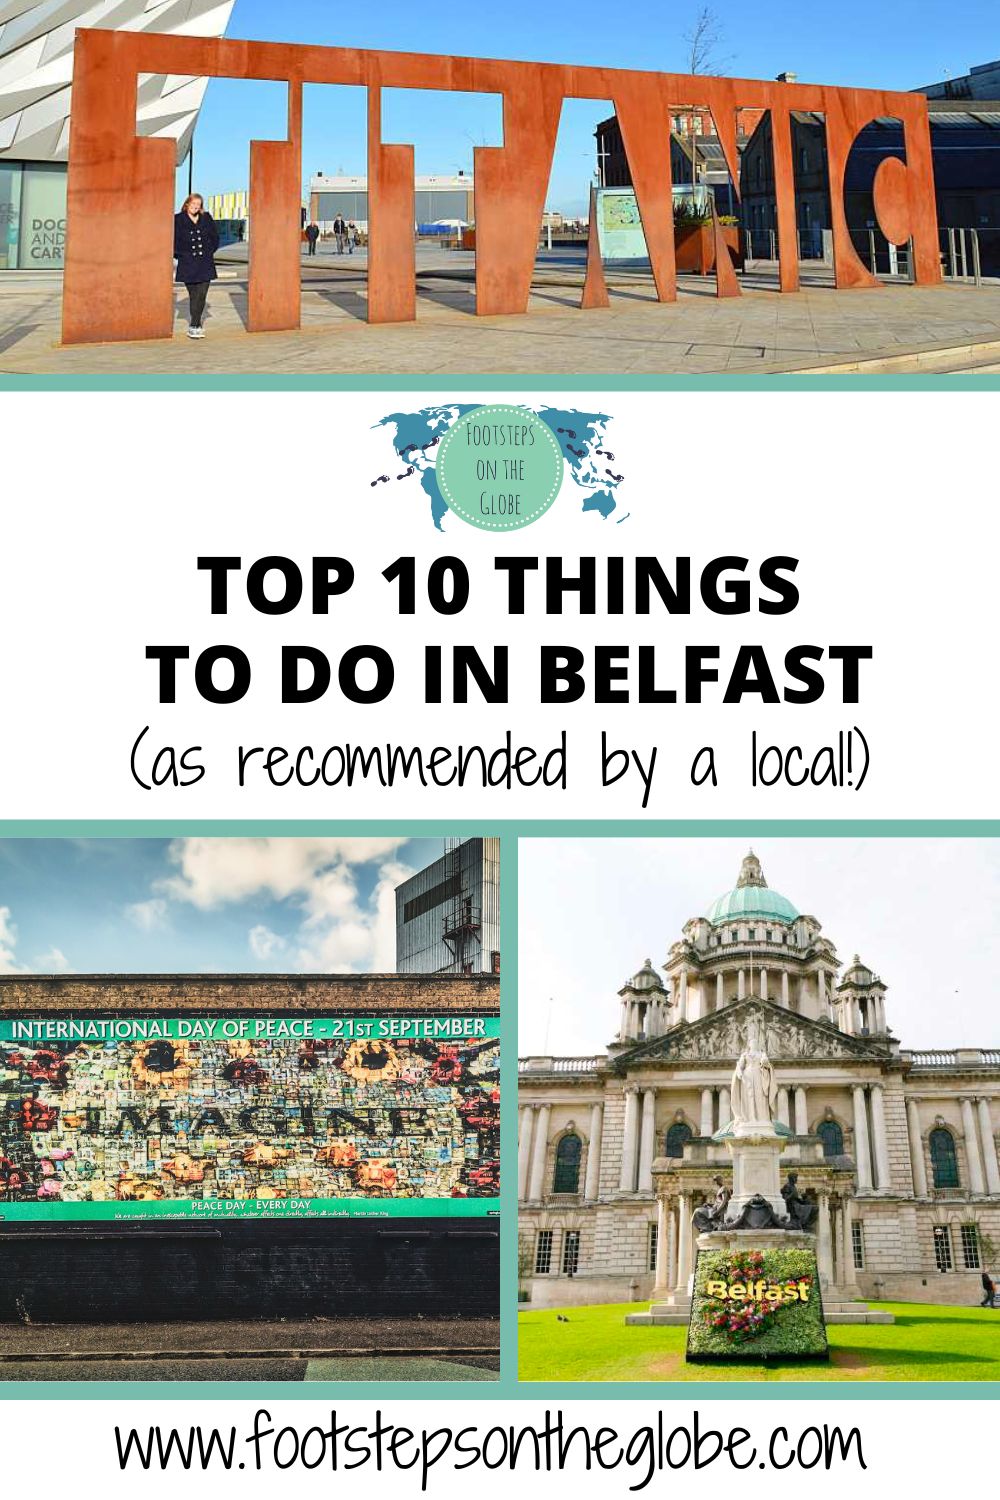 Images of Belfast including the Victorian town hall, street art and Titanic sign with the text: "Top 10 things to do in Belfast (as recommended by a local!) Pinterest image